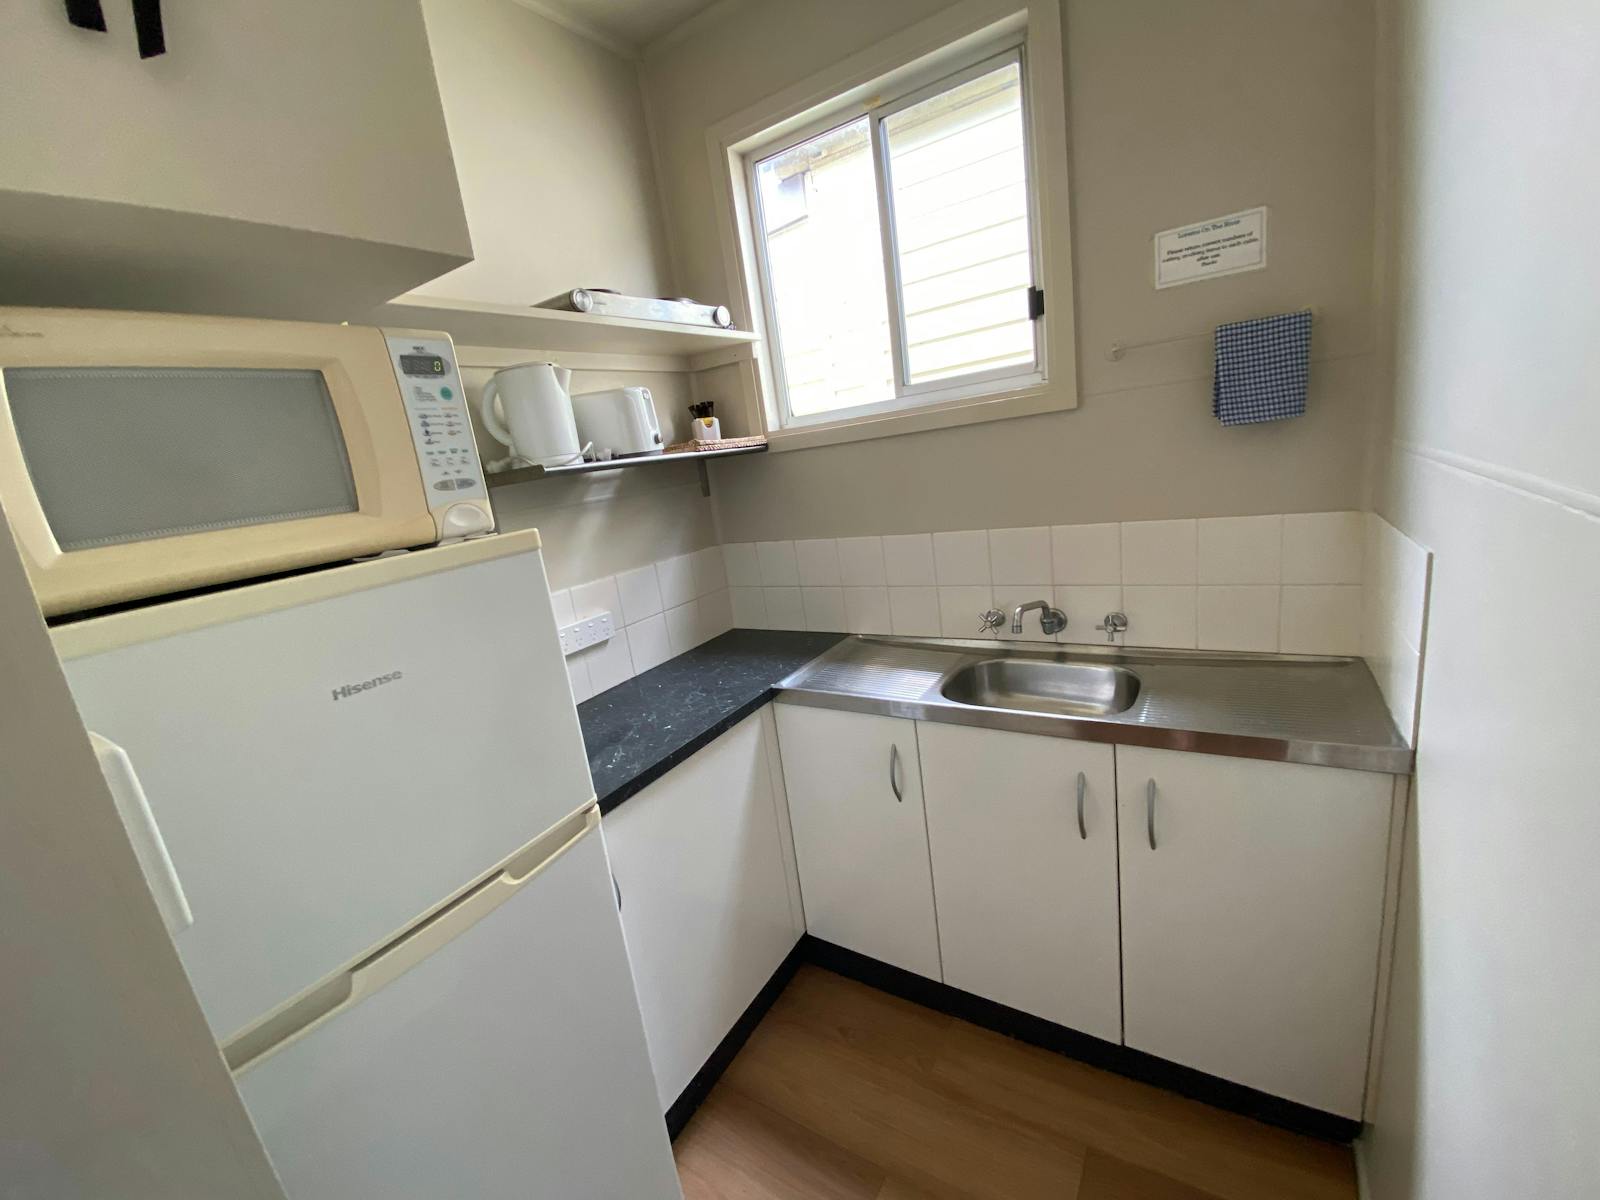 Small compact kitchen includes fridge, microwave, cooktop, crockery & cutlery